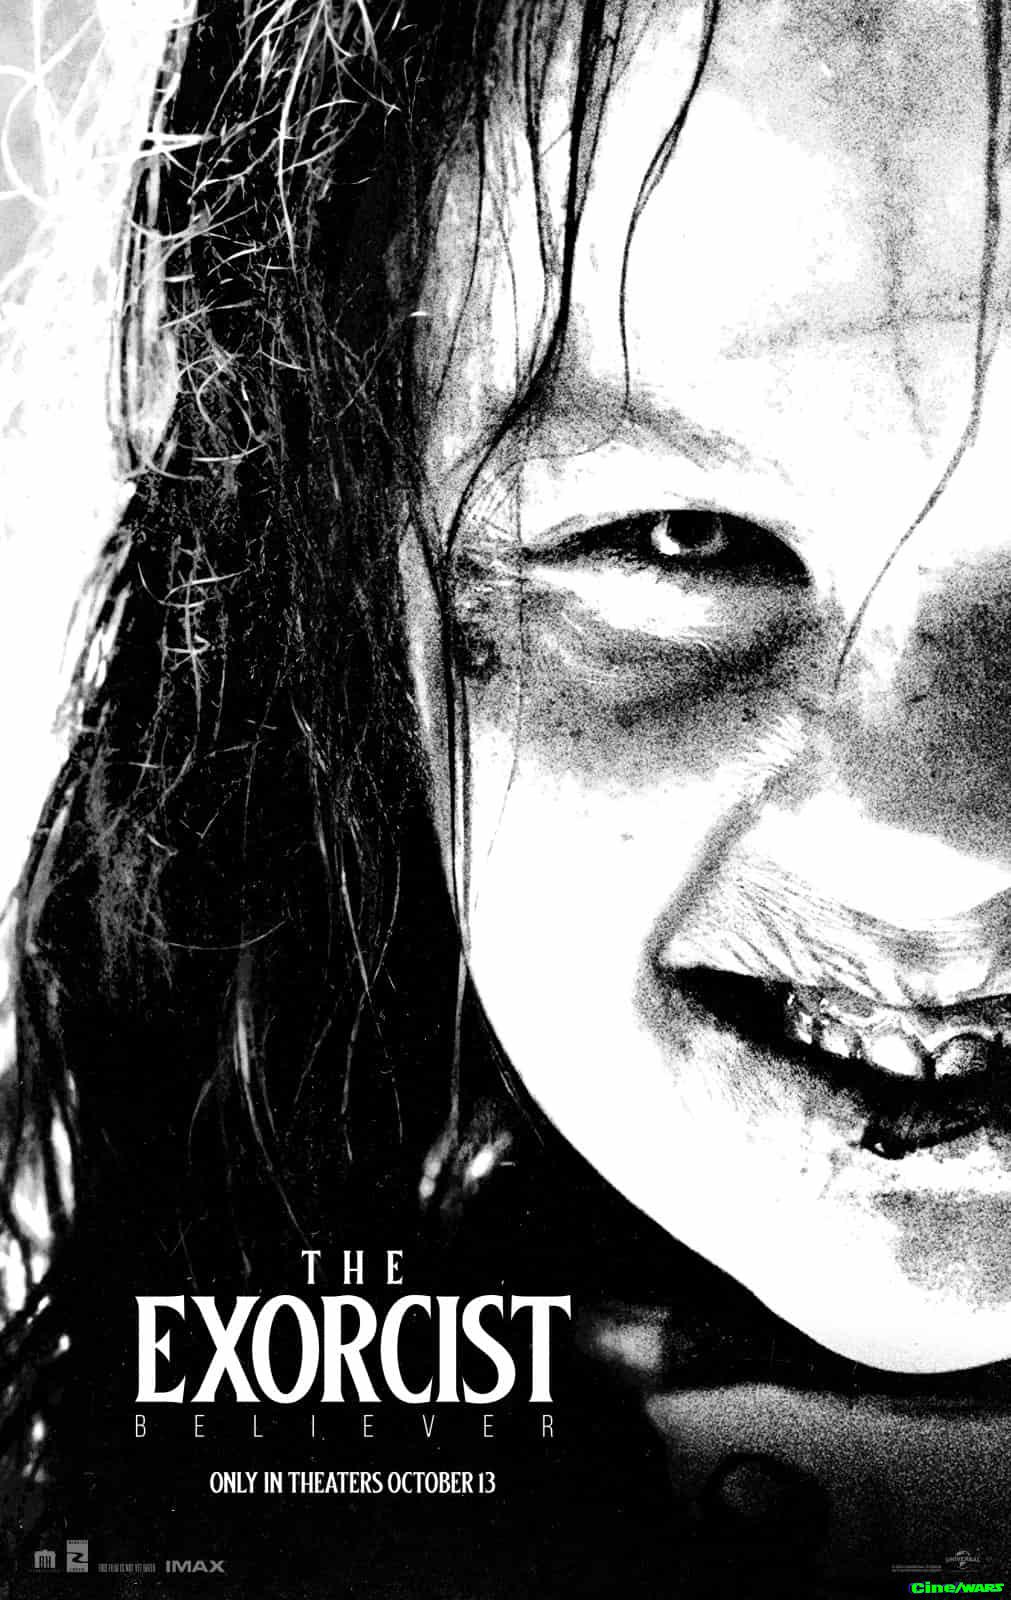 The Exorcist: Believer / Teaser Posters Revealed